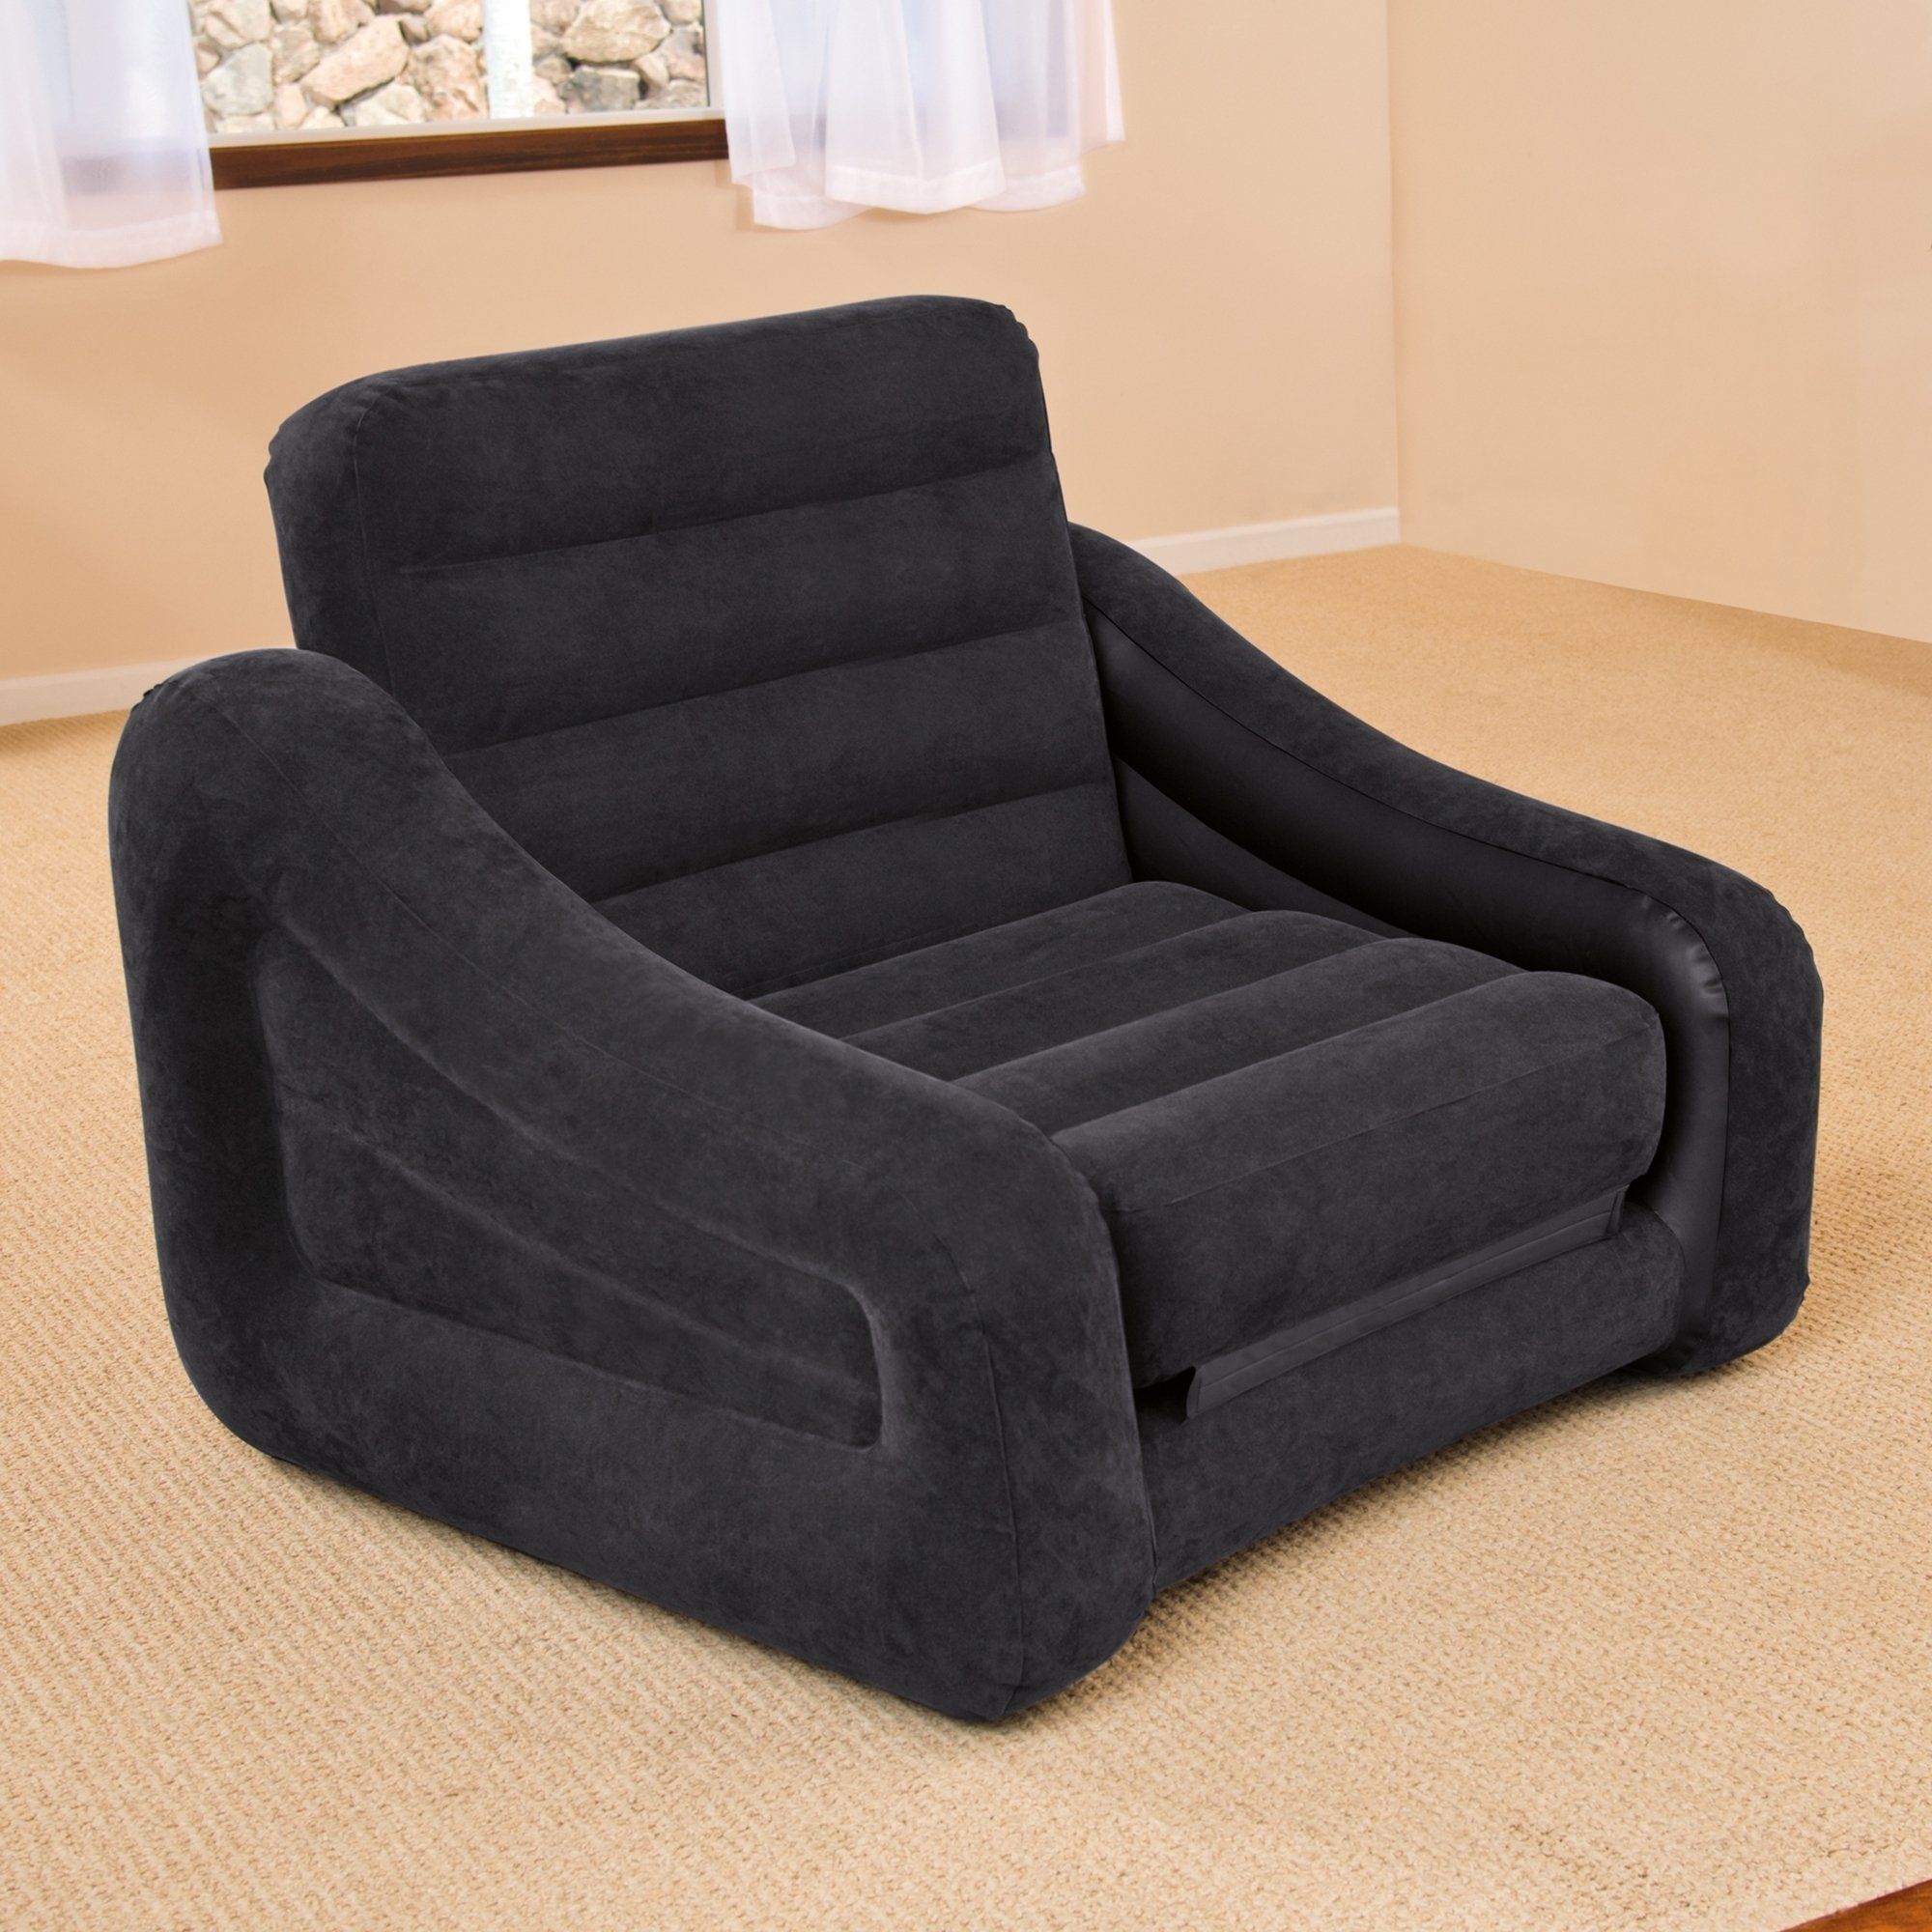 Pull Out Sofa Bed Queen Size Sofa Hpricot Within Pull Out Sofa Bed For Queen Size Sofas (View 9 of 10)